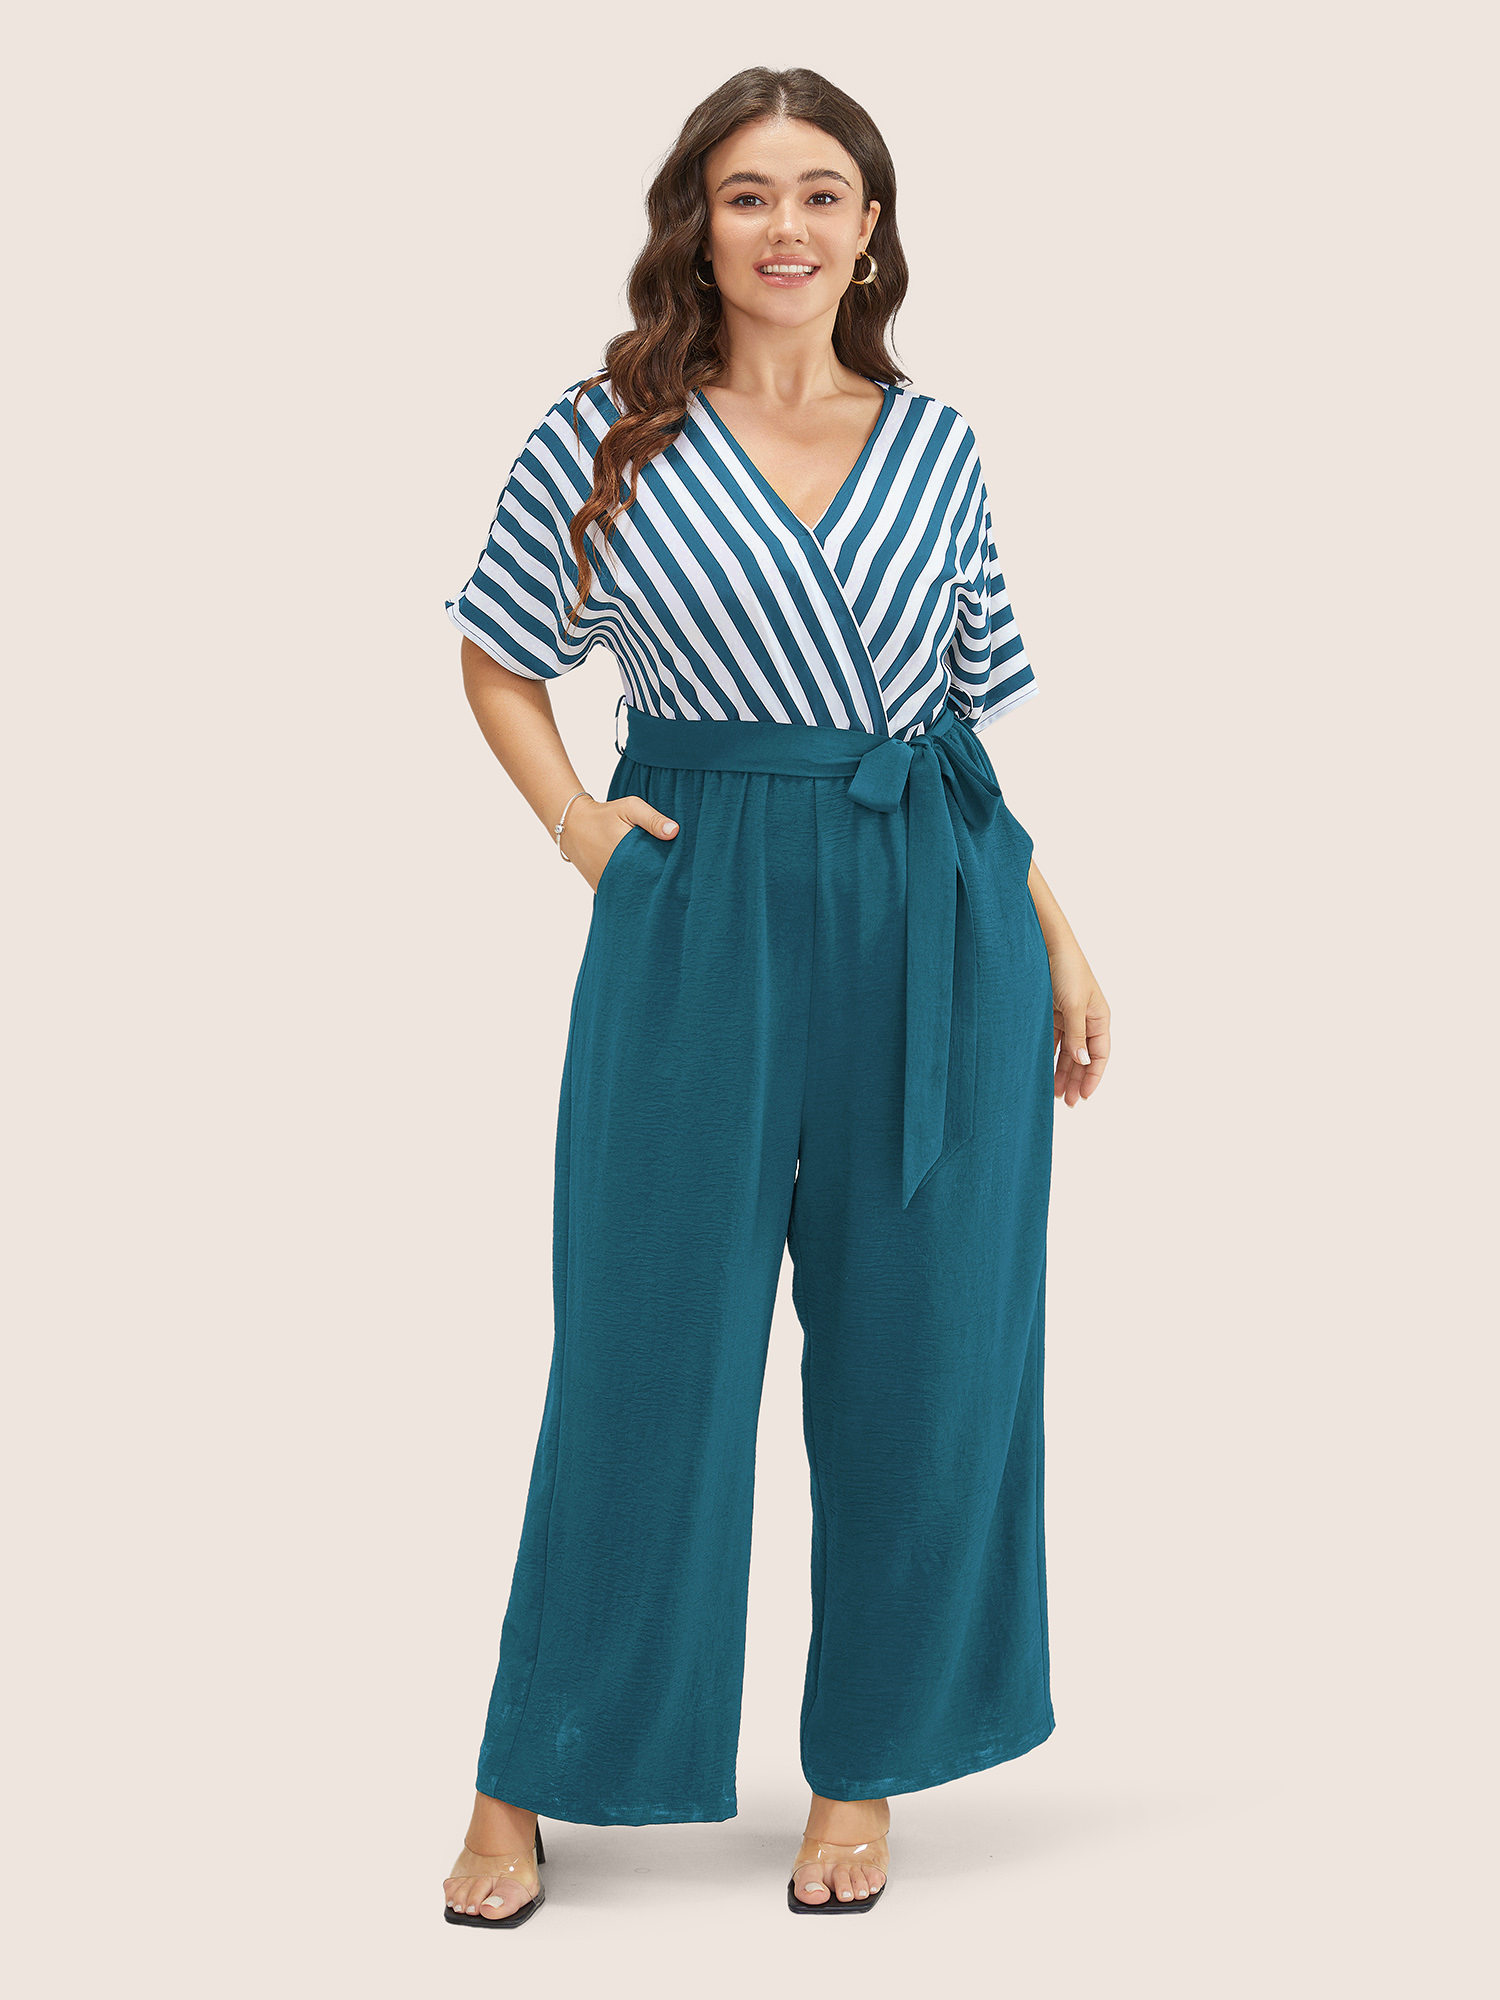 

Plus Size Mediumblue Striped Patchwork Pocket Batwing Sleeve Belted Wrap Jumpsuit Women At the Office Short sleeve Overlap Collar Work Loose Jumpsuits BloomChic